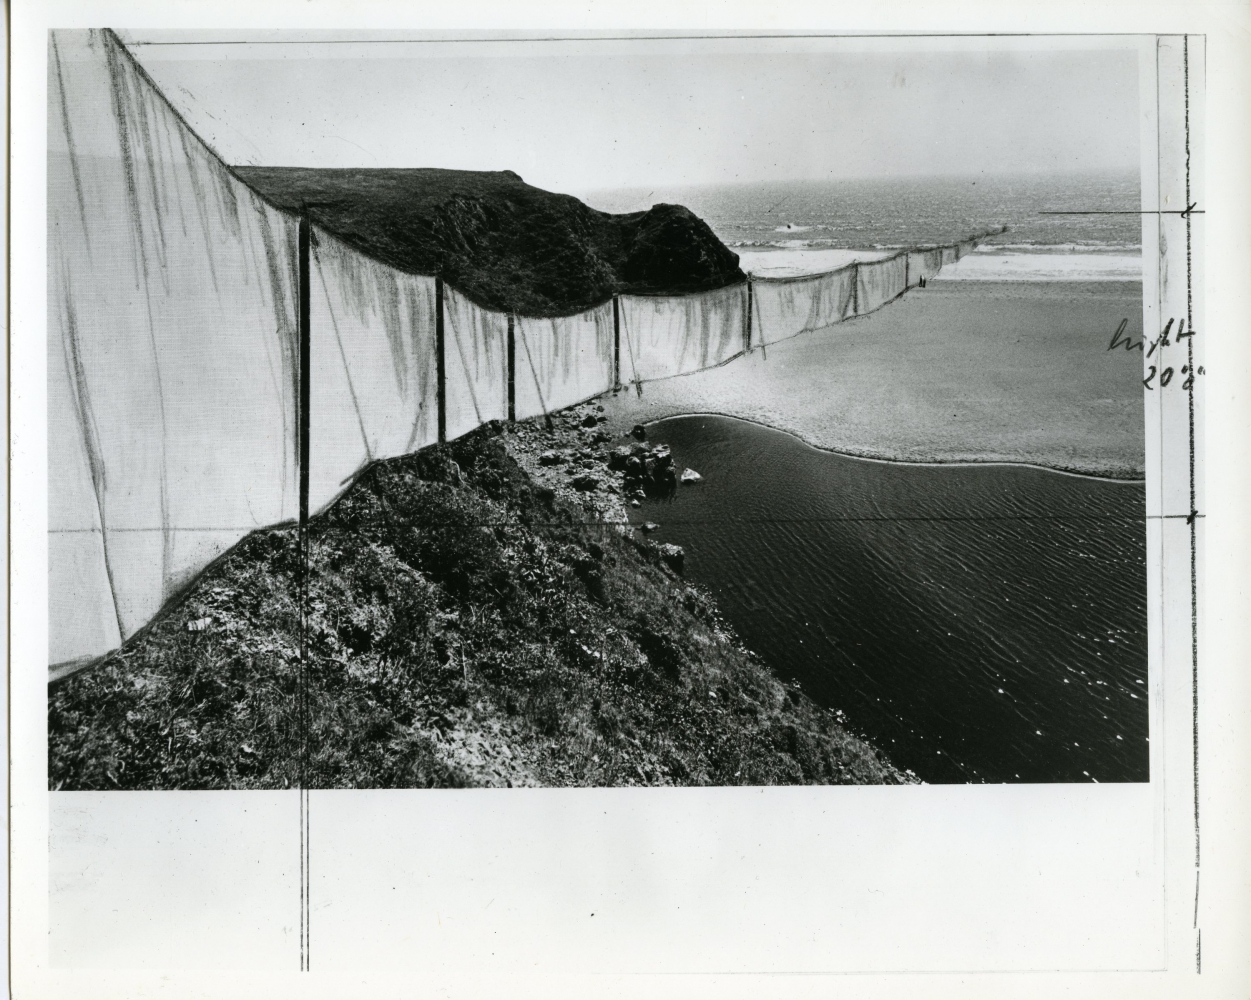 1973-74&nbsp;Christo,&nbsp;detail of &quot;Running Fence (Project for Marin Sonoma County - California)&quot; Collage on photograph by Harry Shunk., &copy; 1973, Christo, courtesy of the George Adams Gallery Archives.